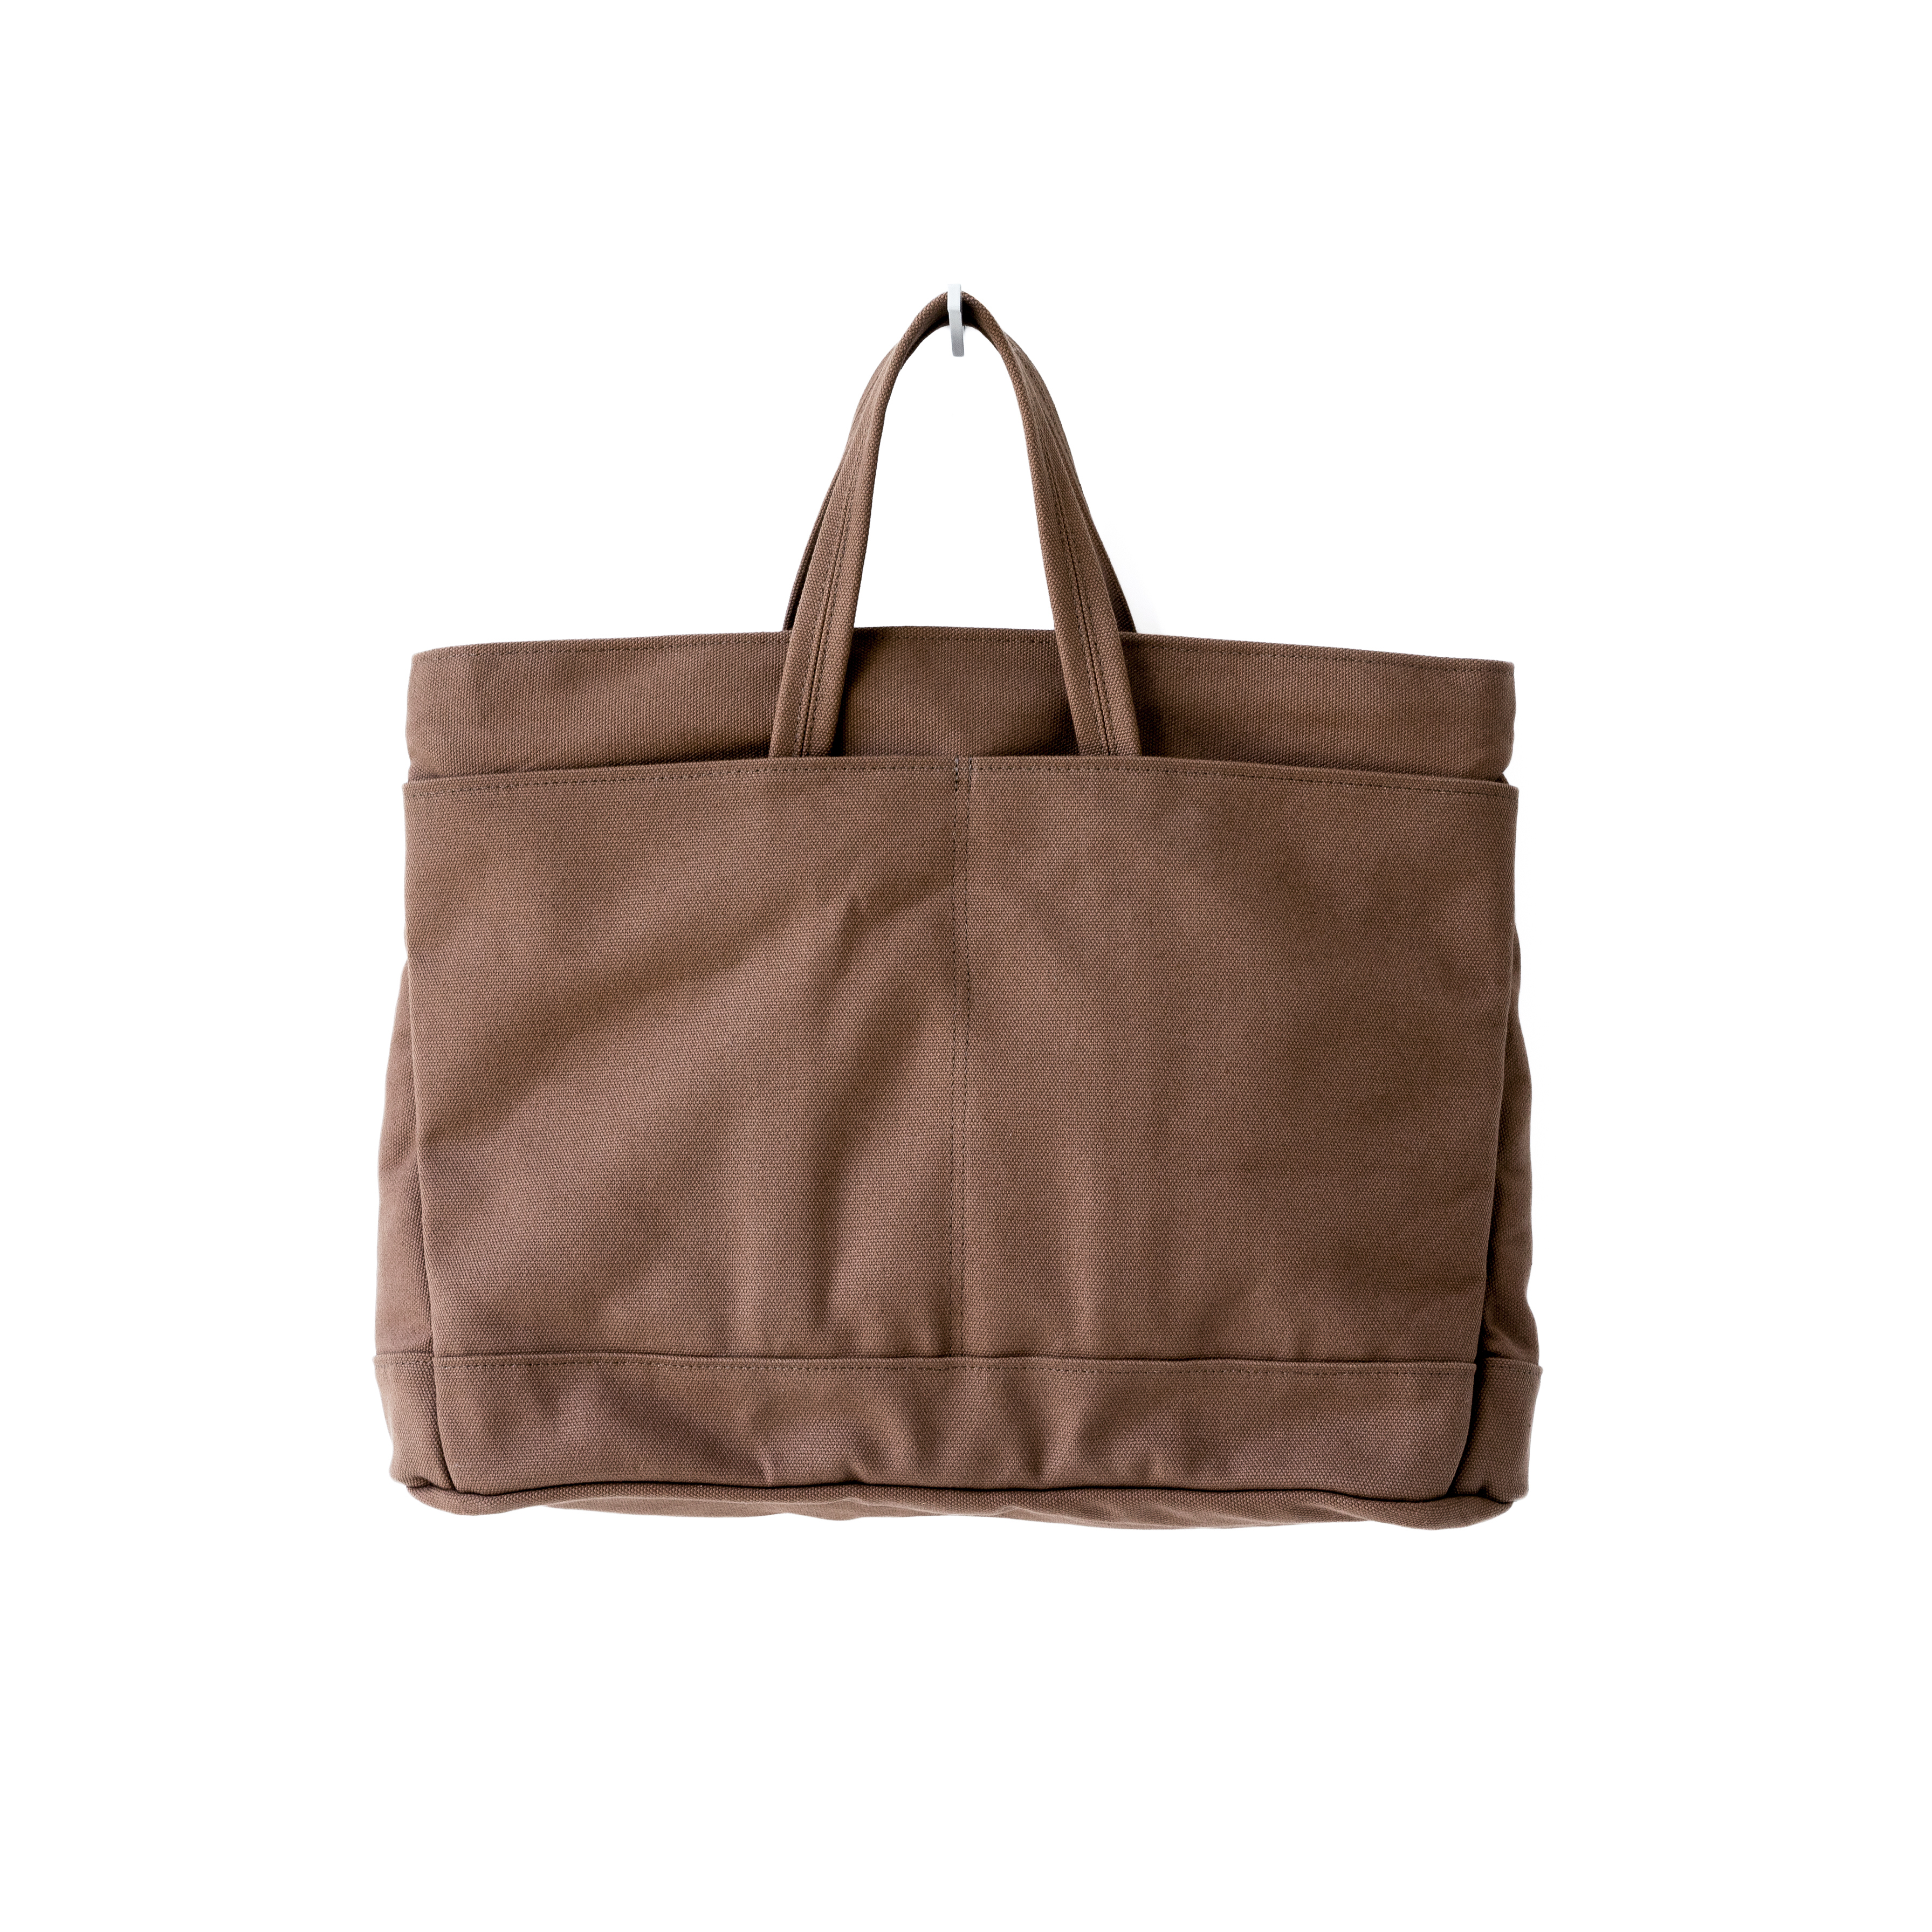 Mini Carryall Tote Bag in Canvas from Brady Bags